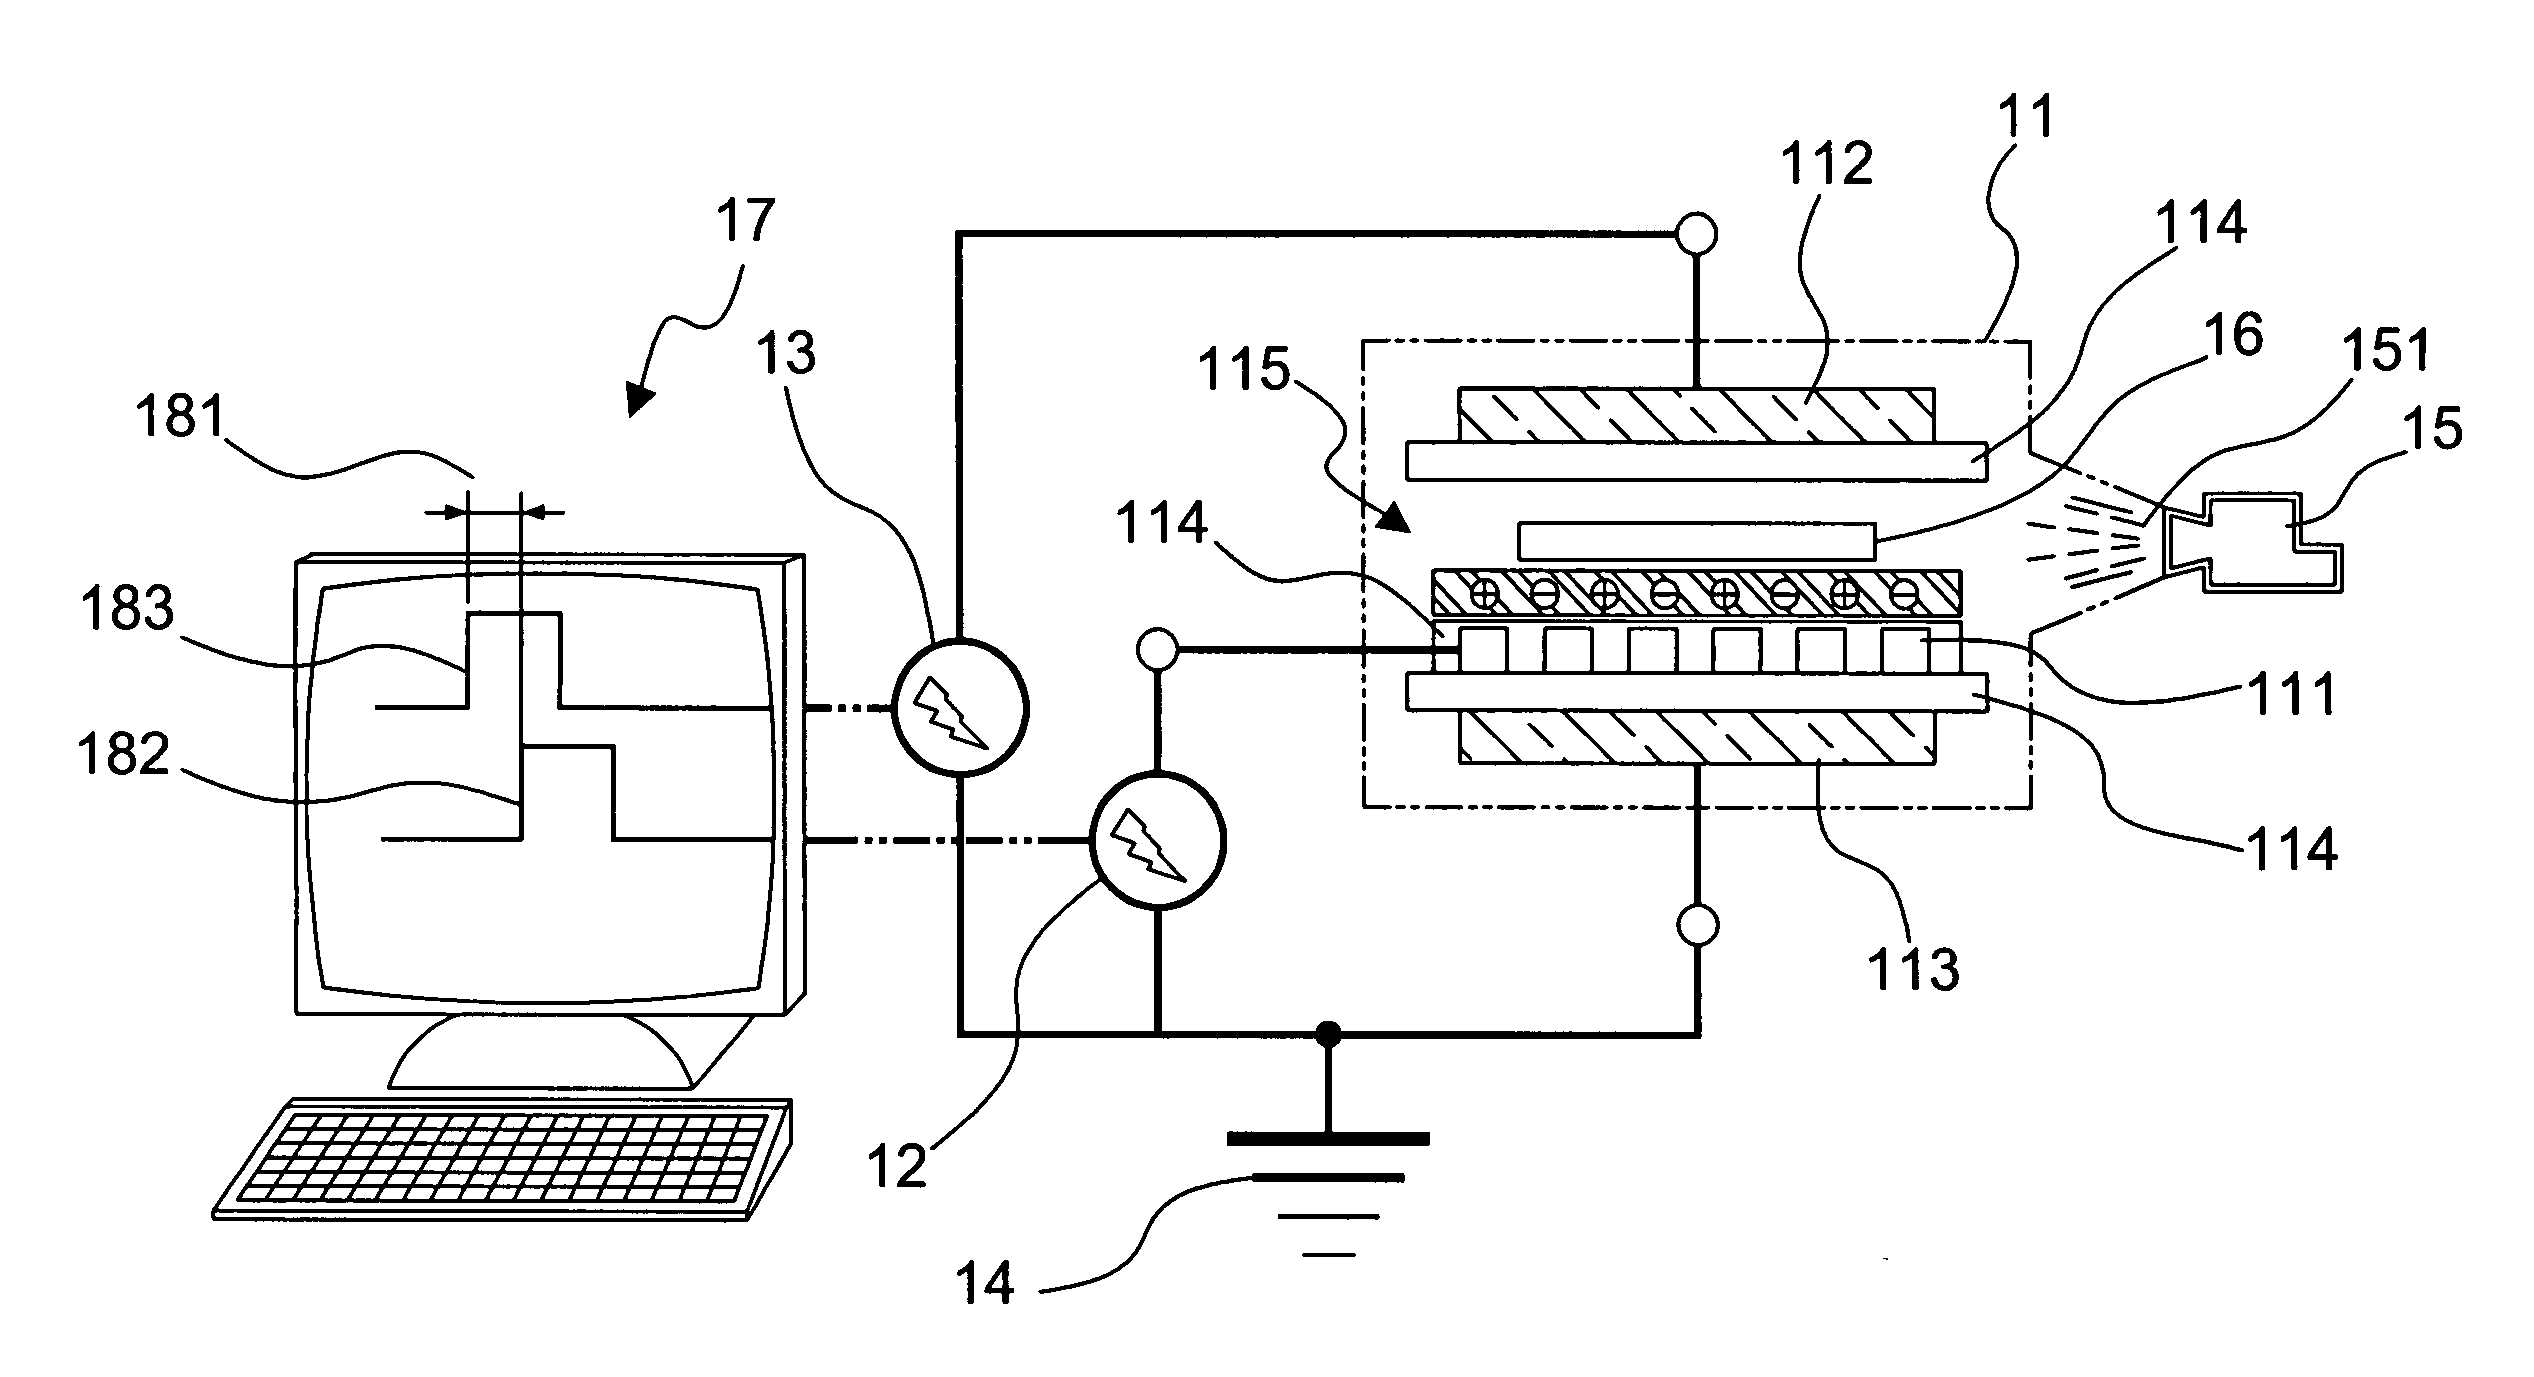 Apparatus of triple-electrode dielectric barrier discharge at atmospheric pressure